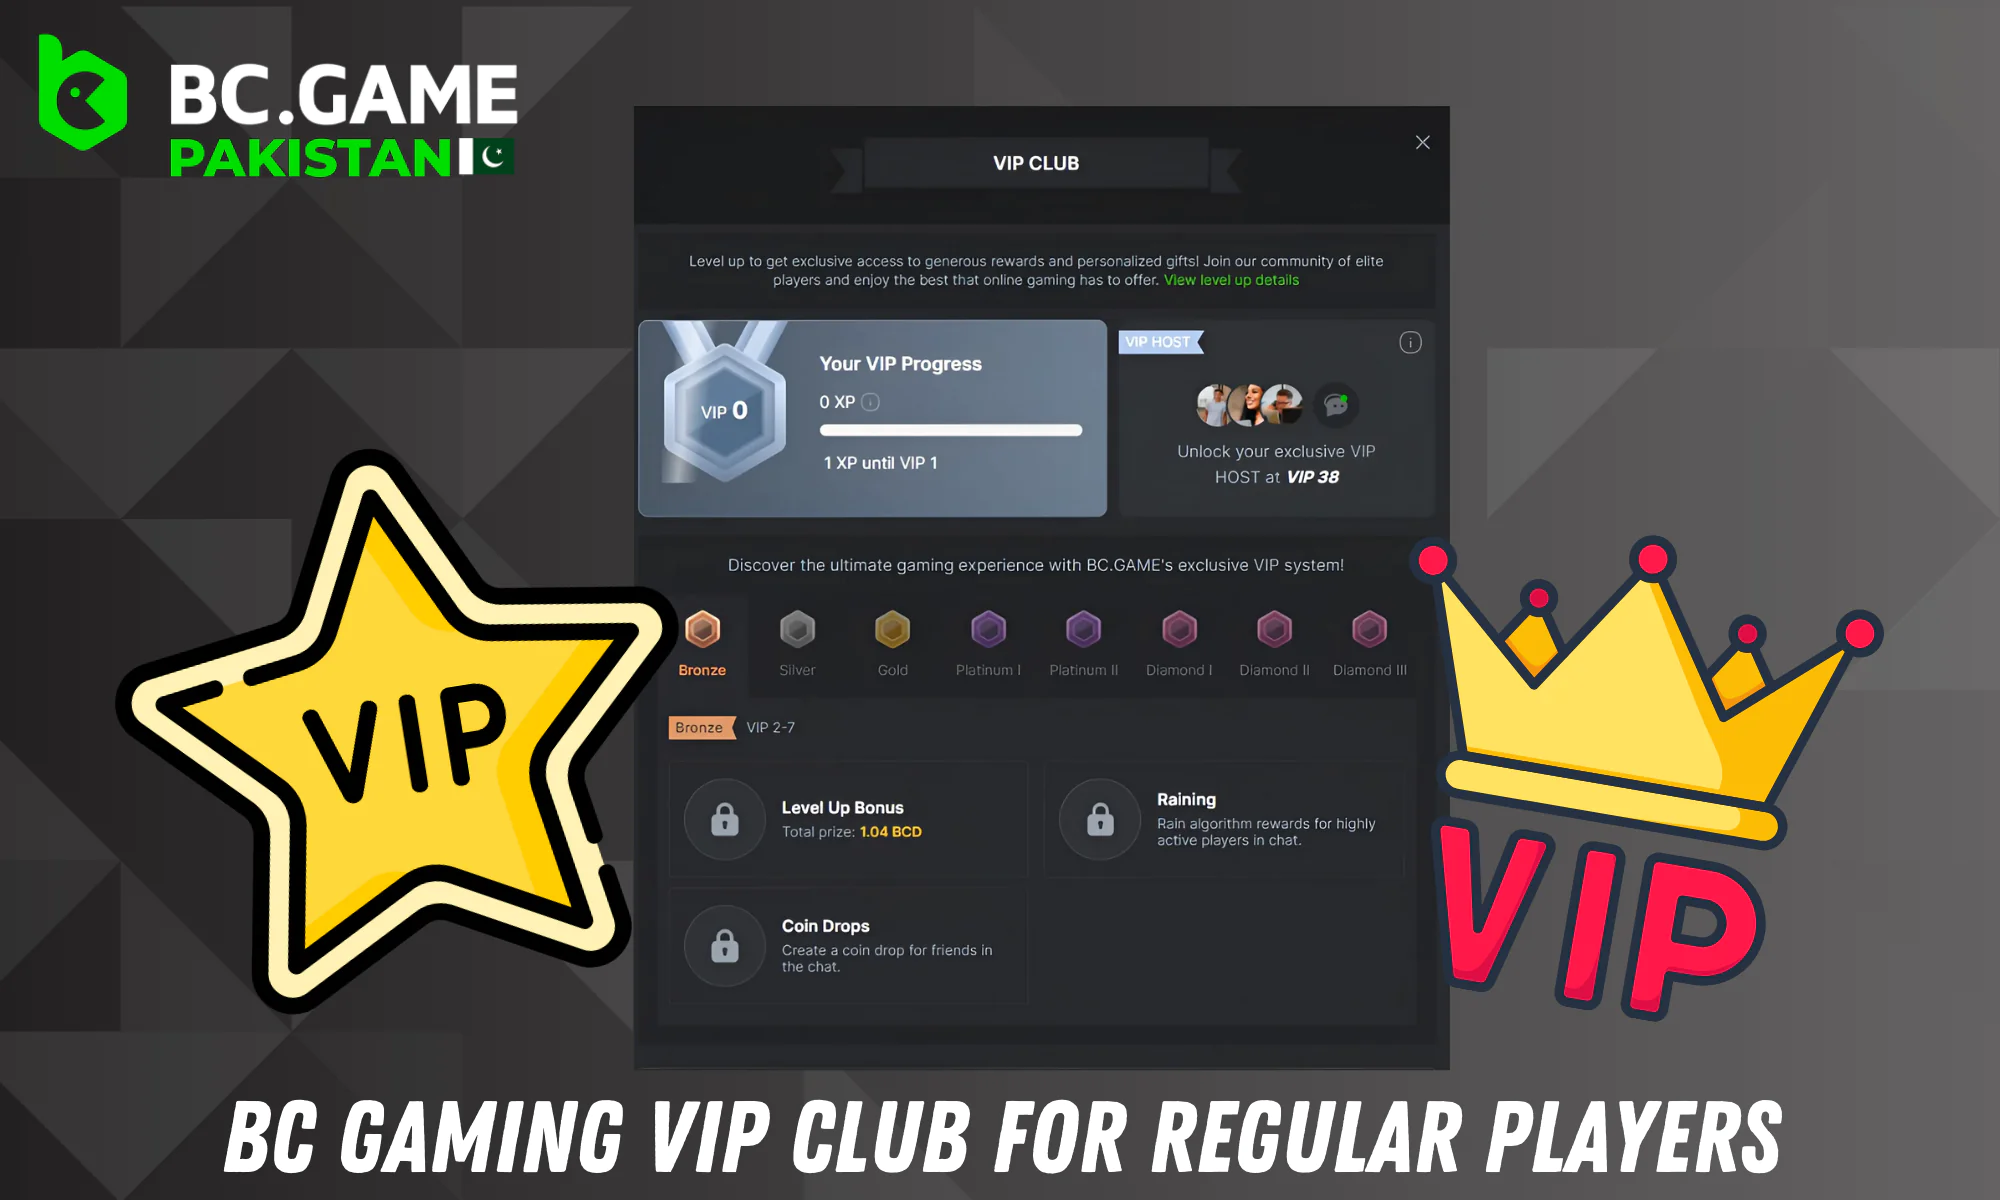 BC Casino rewards regular players with a tiered VIP club